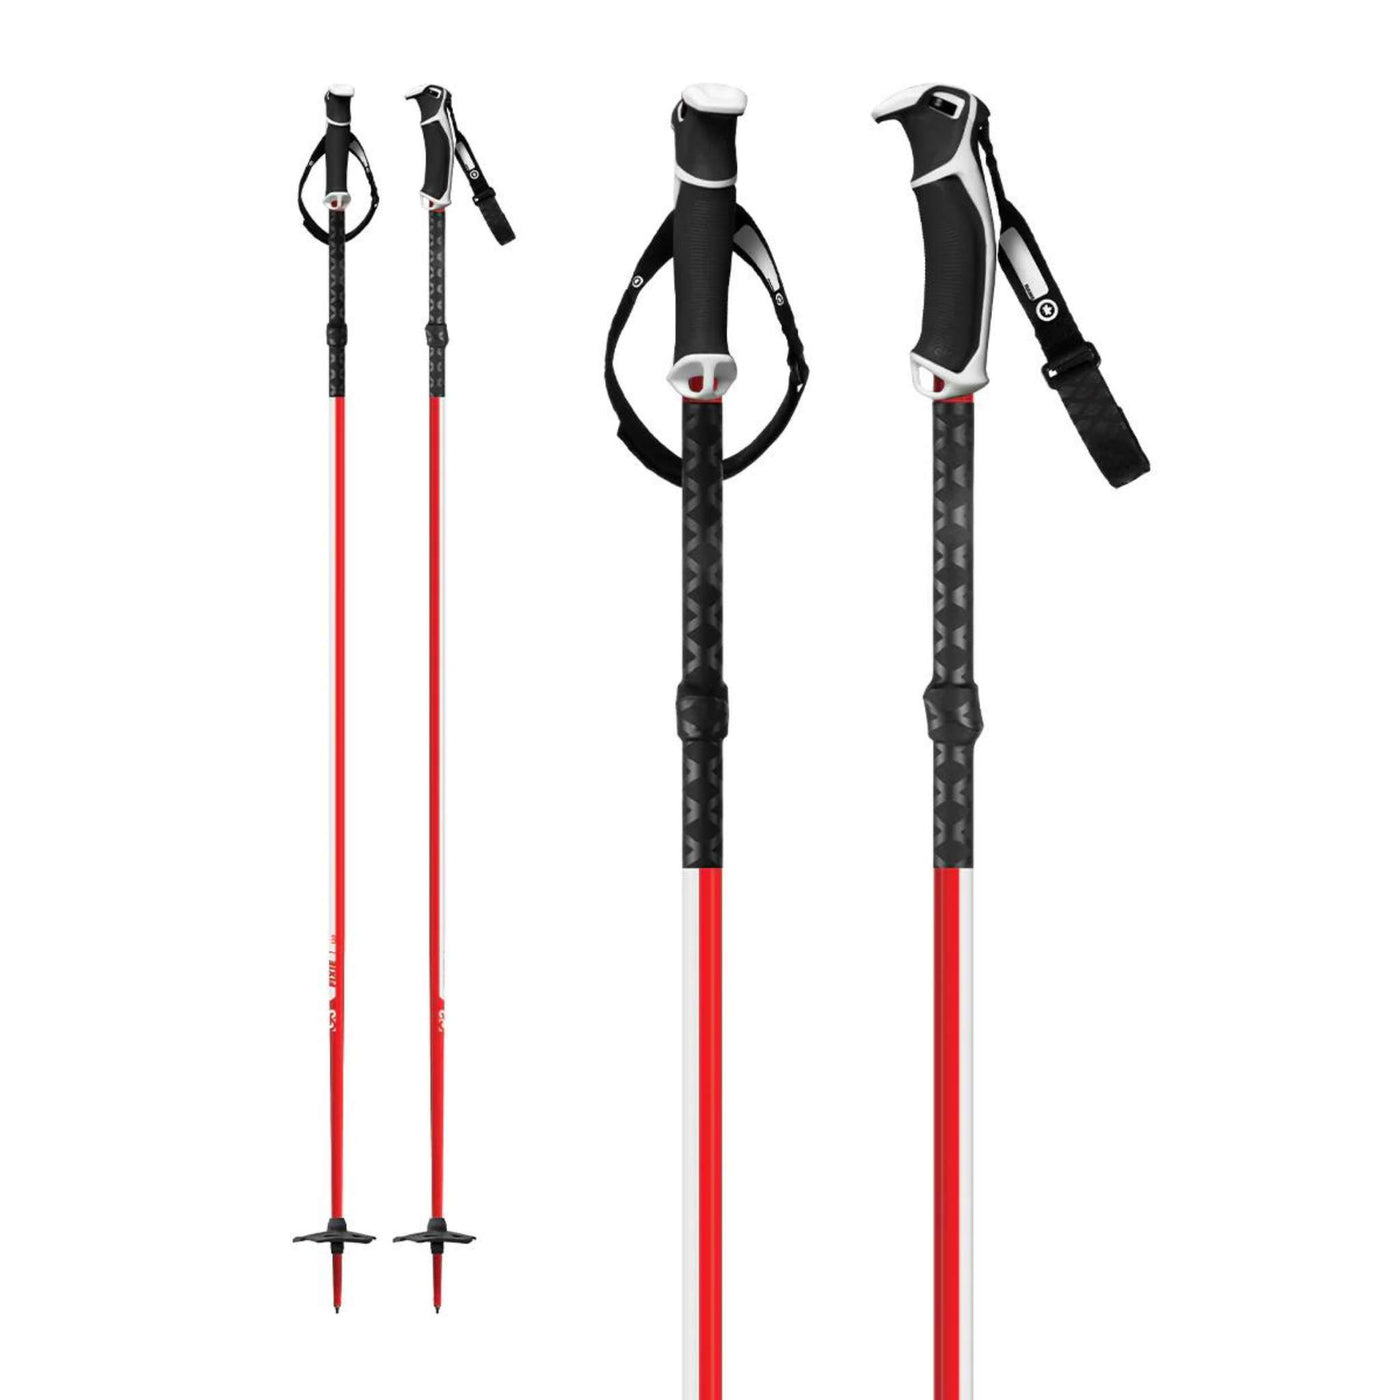 G3 Fixie Ski Poles - One Piece - Pair | Ski Touring Poles | Further Faster Christchurch NZ #red